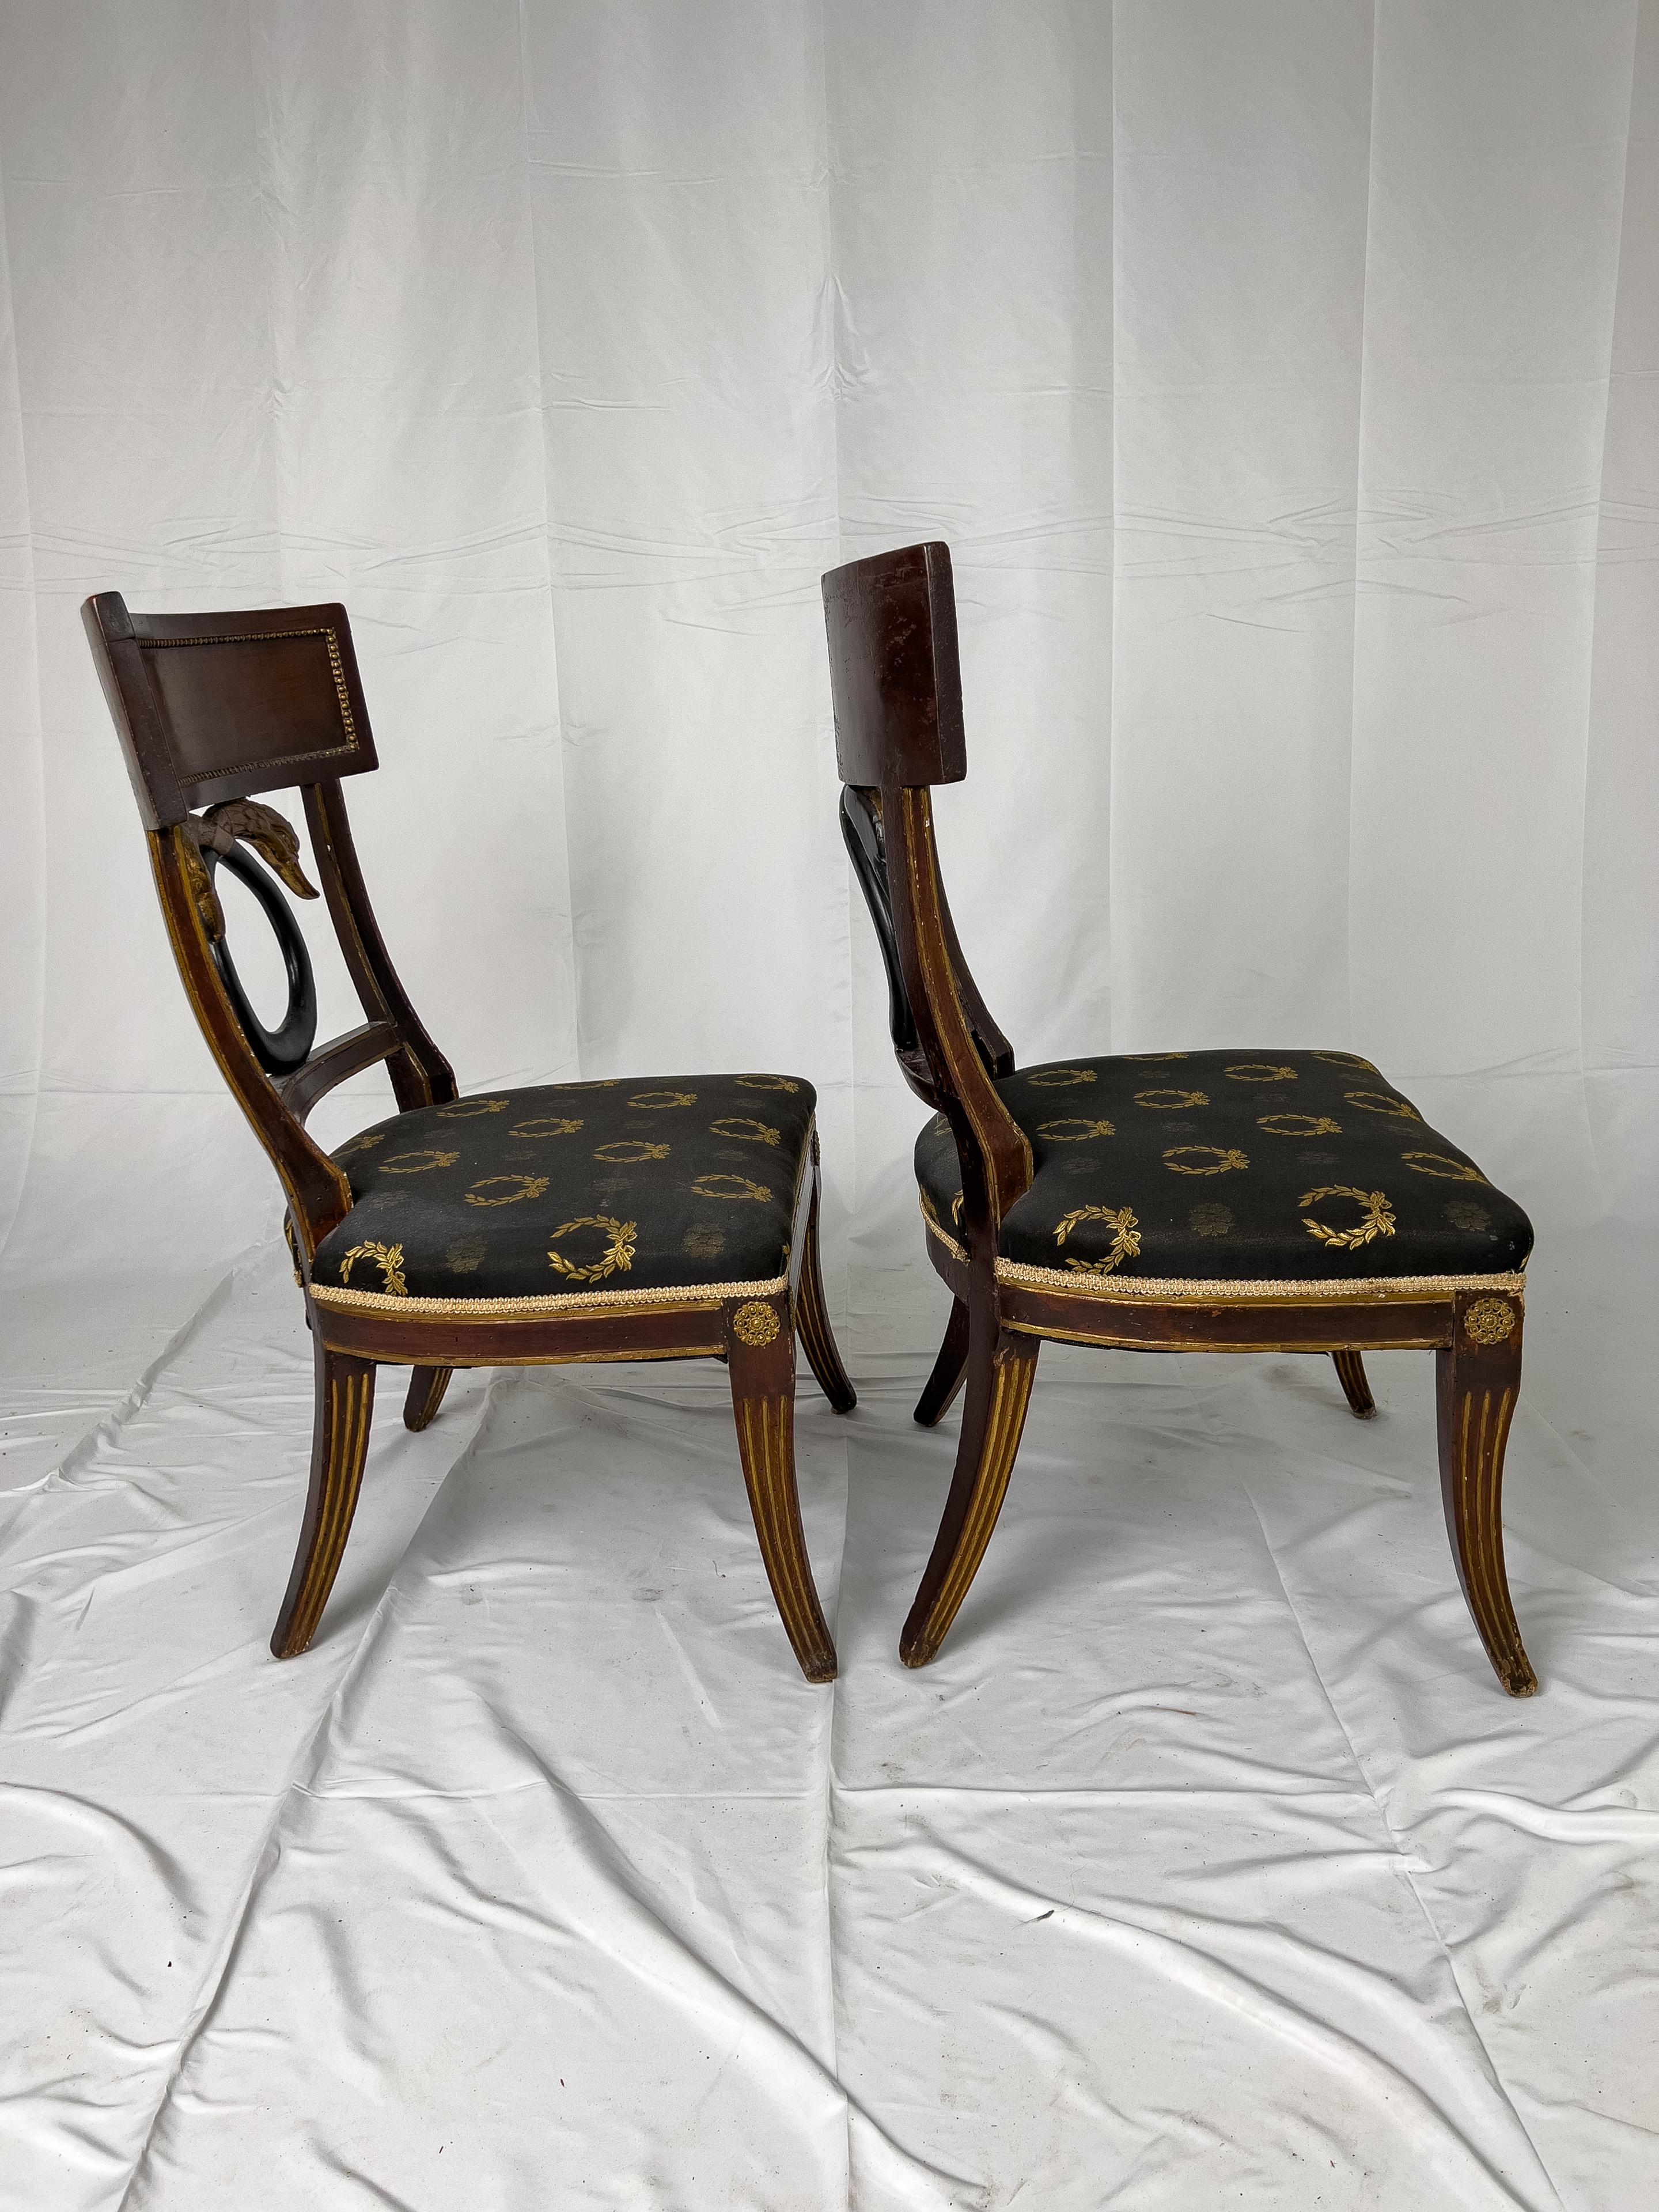 Ebonized 18th Century Russian Empire Style Side Chairs